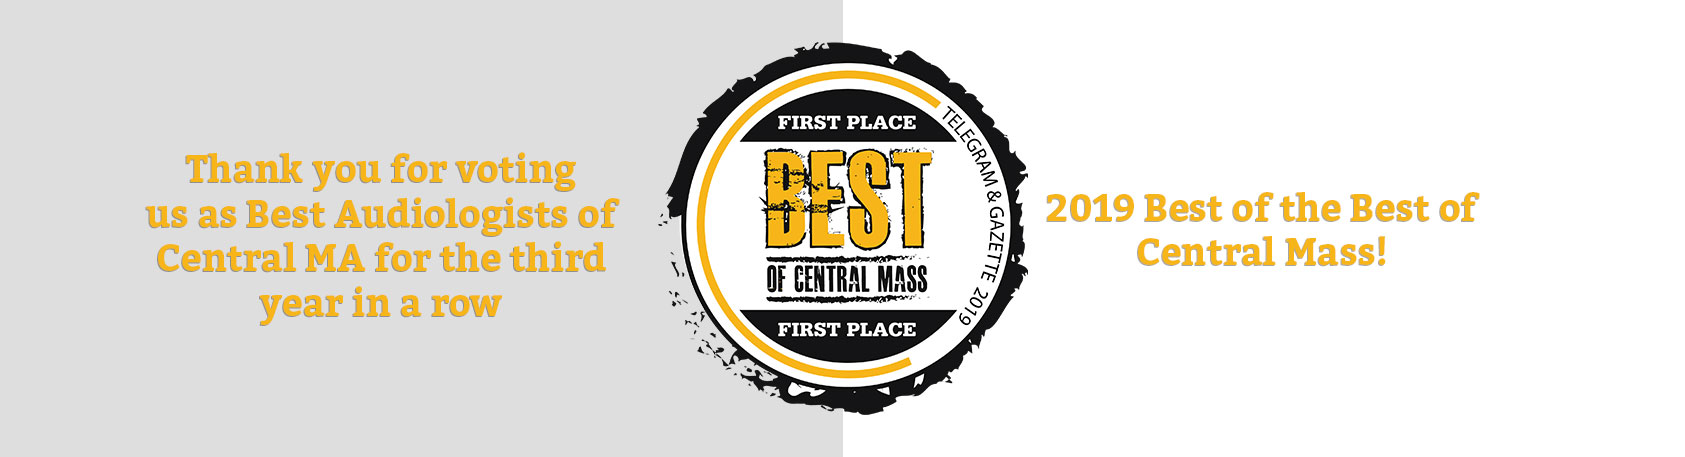 Best of Central Mass 2019 - Worcester, MA